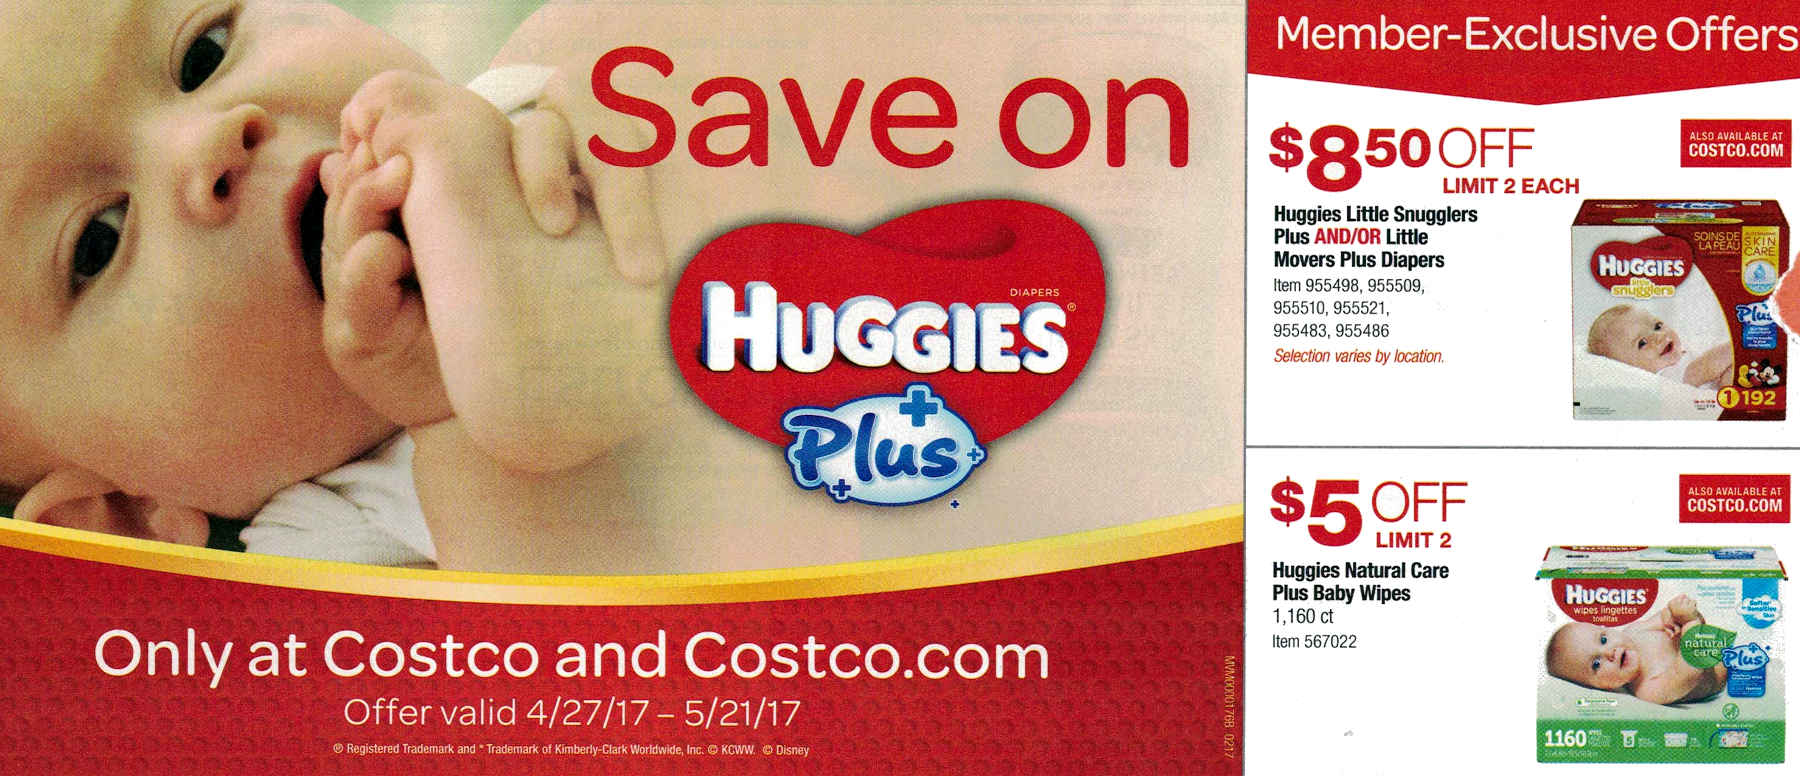 Coupon book full size page -> 2 <-